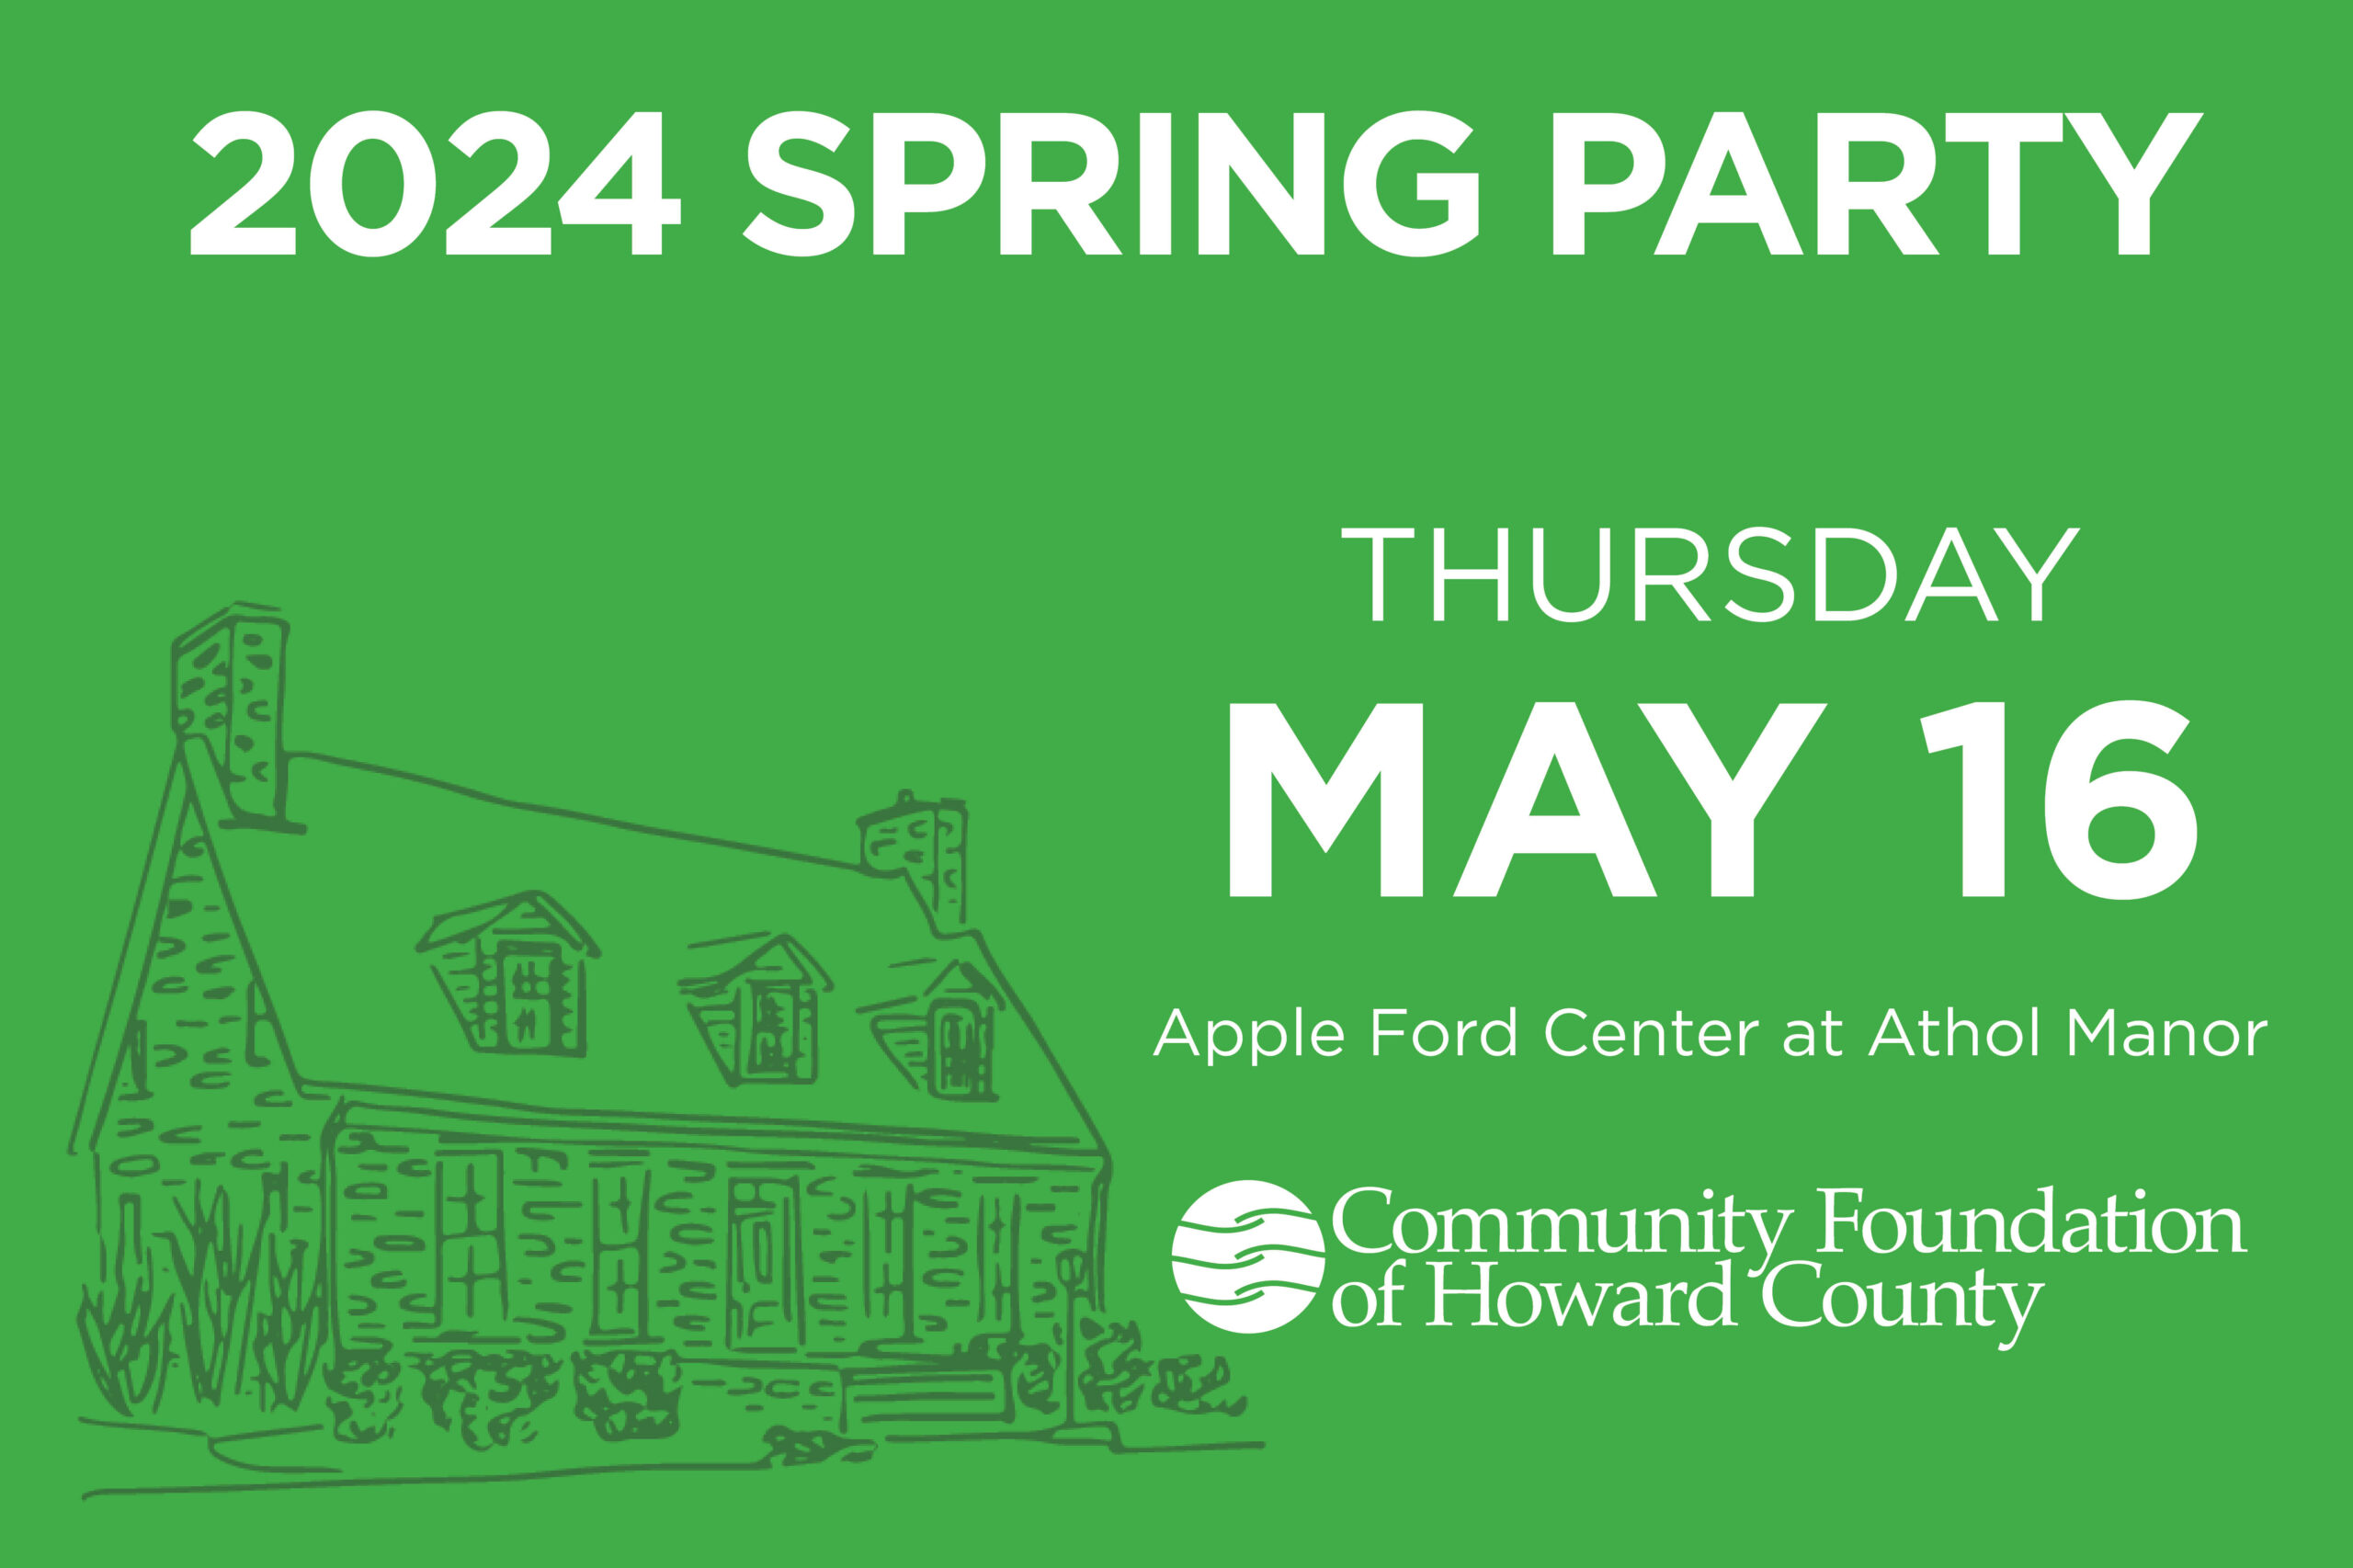 2024 Spring Party Information